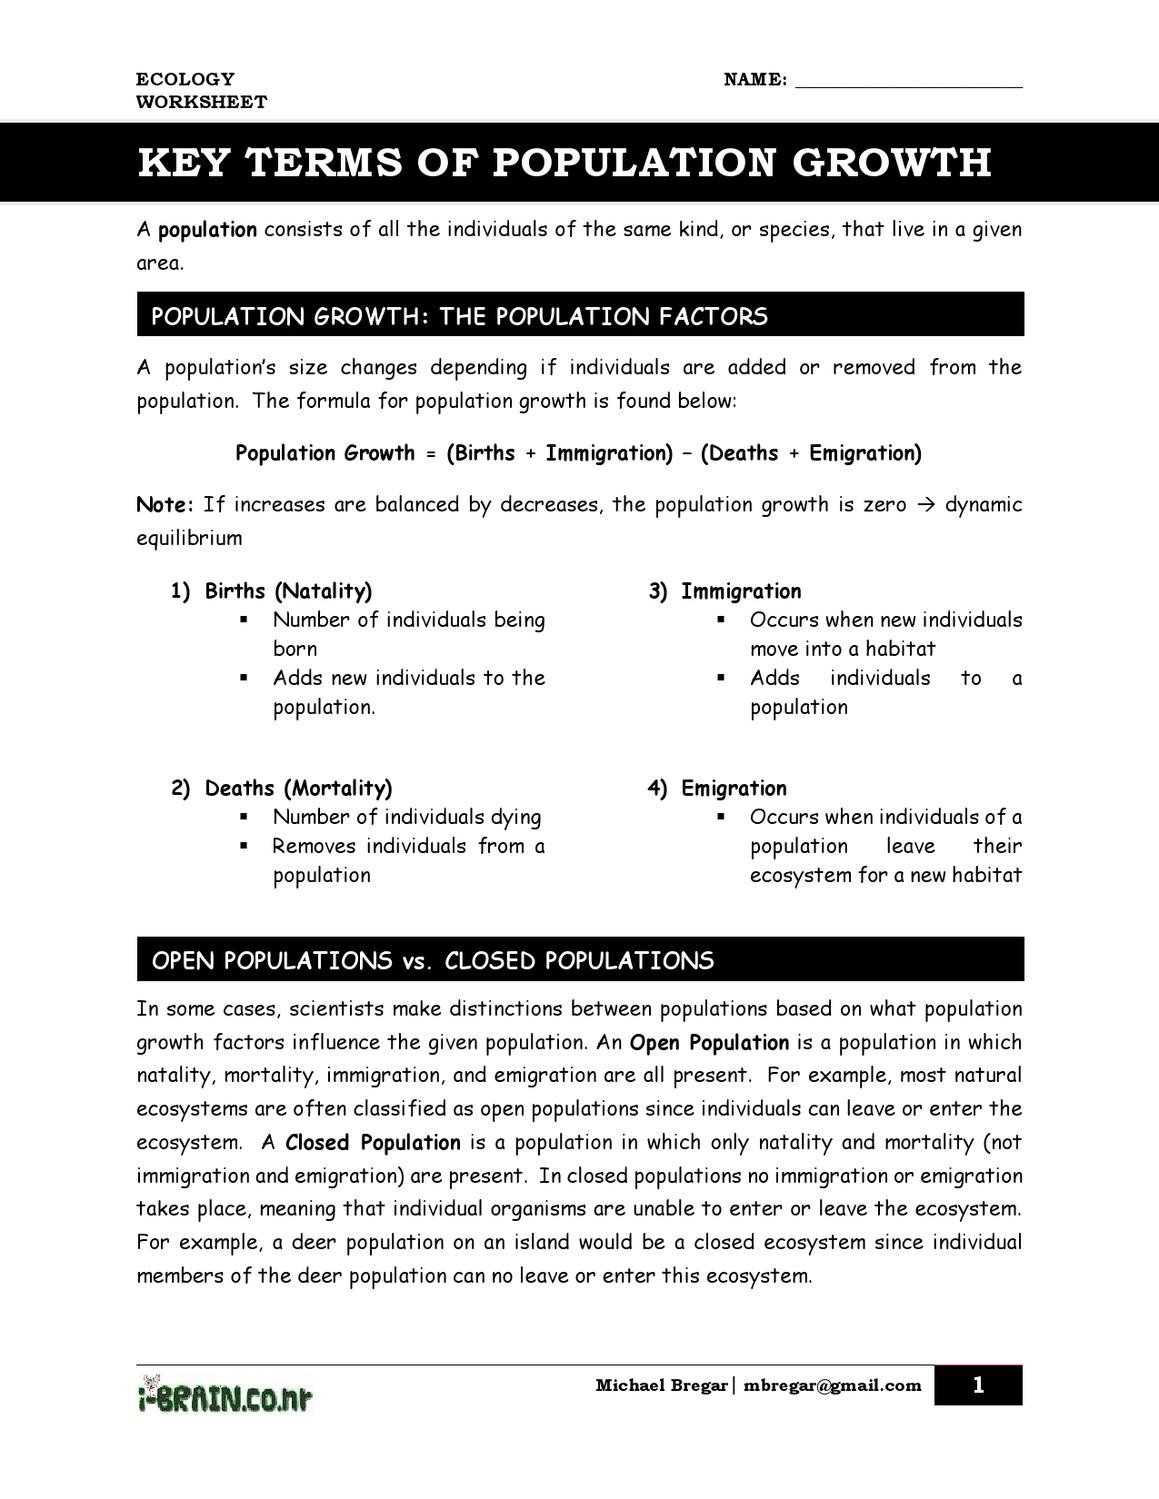 Human Population Growth Worksheet Handout Key Terms Of Population Growth by Michael Bregar